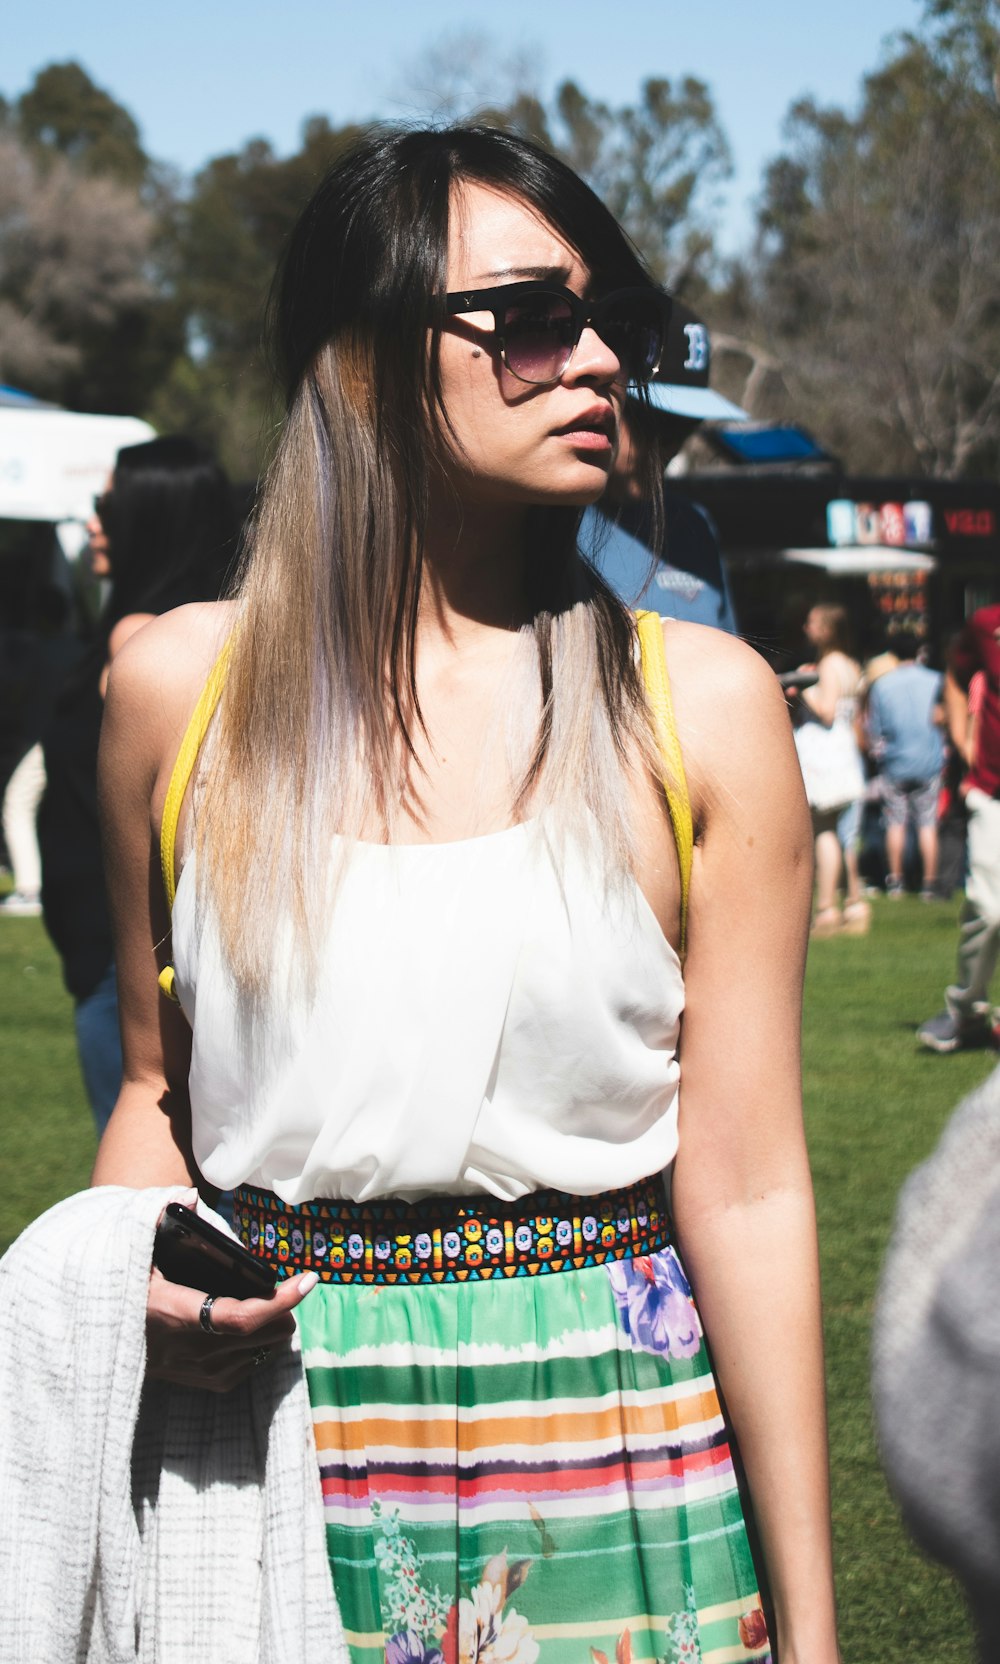 woman wearing shades, white top and colorful skirt